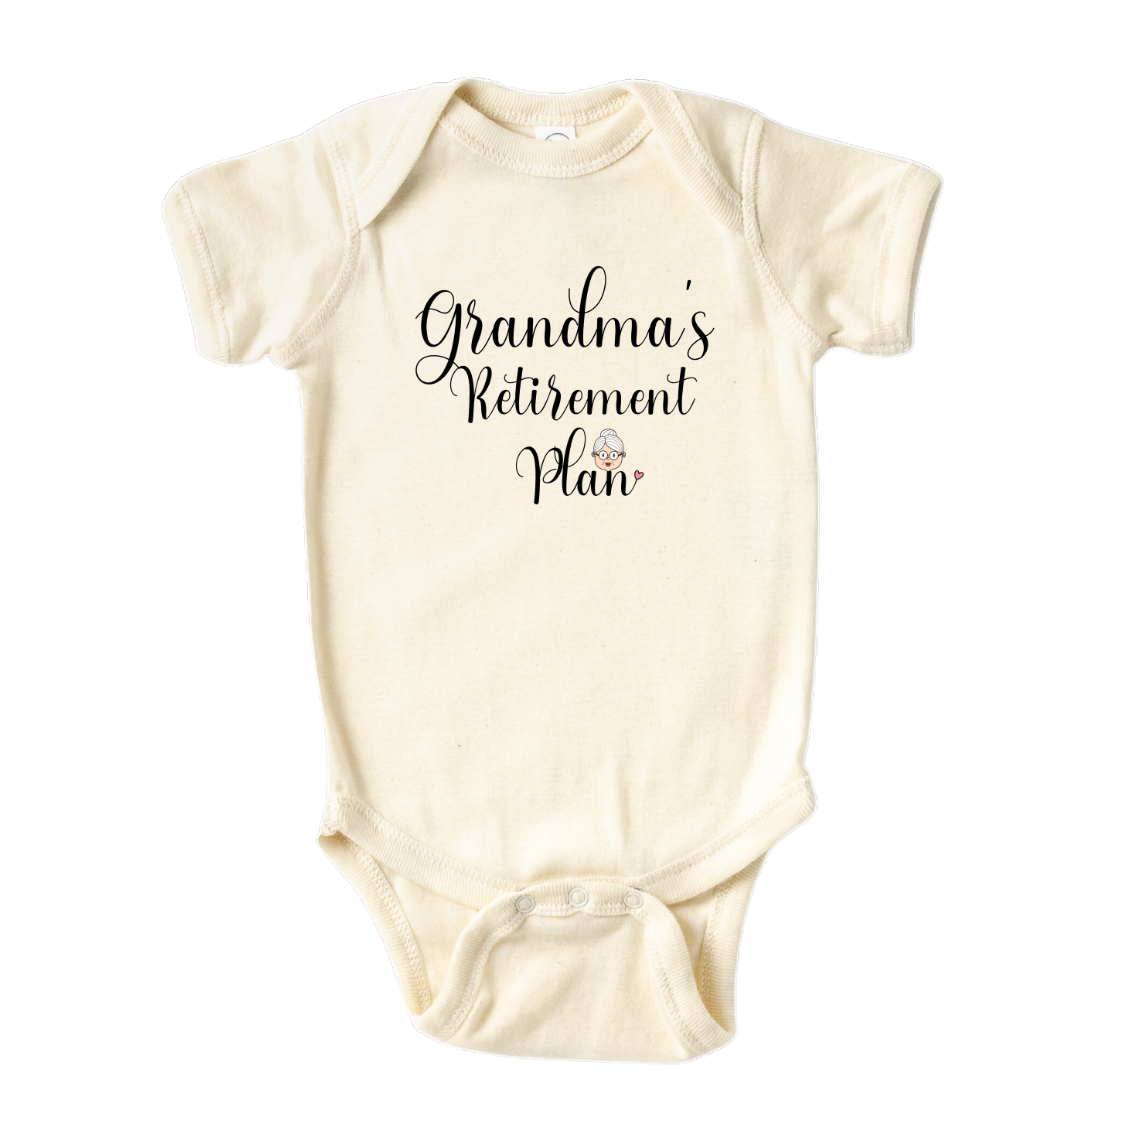 Natural Baby Clothes kid's t-shirt with a cute printed graphic that says 'Grandma's Retirement Plan.' The t-shirt features an adorable design and is made with high-quality materials for comfort and longevity. 